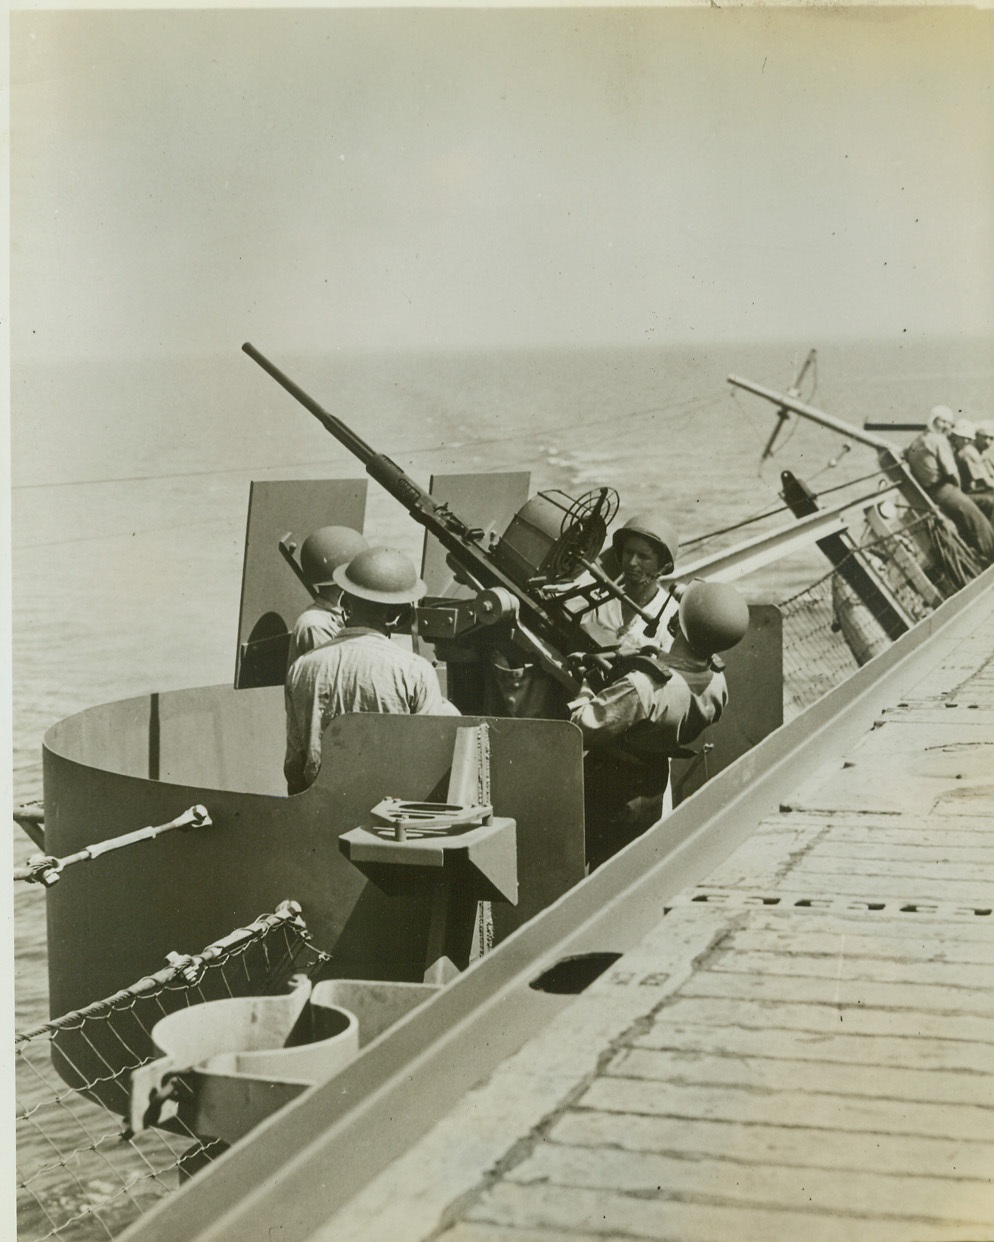 Tense Moment on a U.S. Tanker in a Convoy, 8/4/1942. Life-jacketed U.S. sailors leap to their guns as a submarine alarm is sounded on a naval tanker in a convoy somewhere in the Indian ocean. Credit line (ACME);